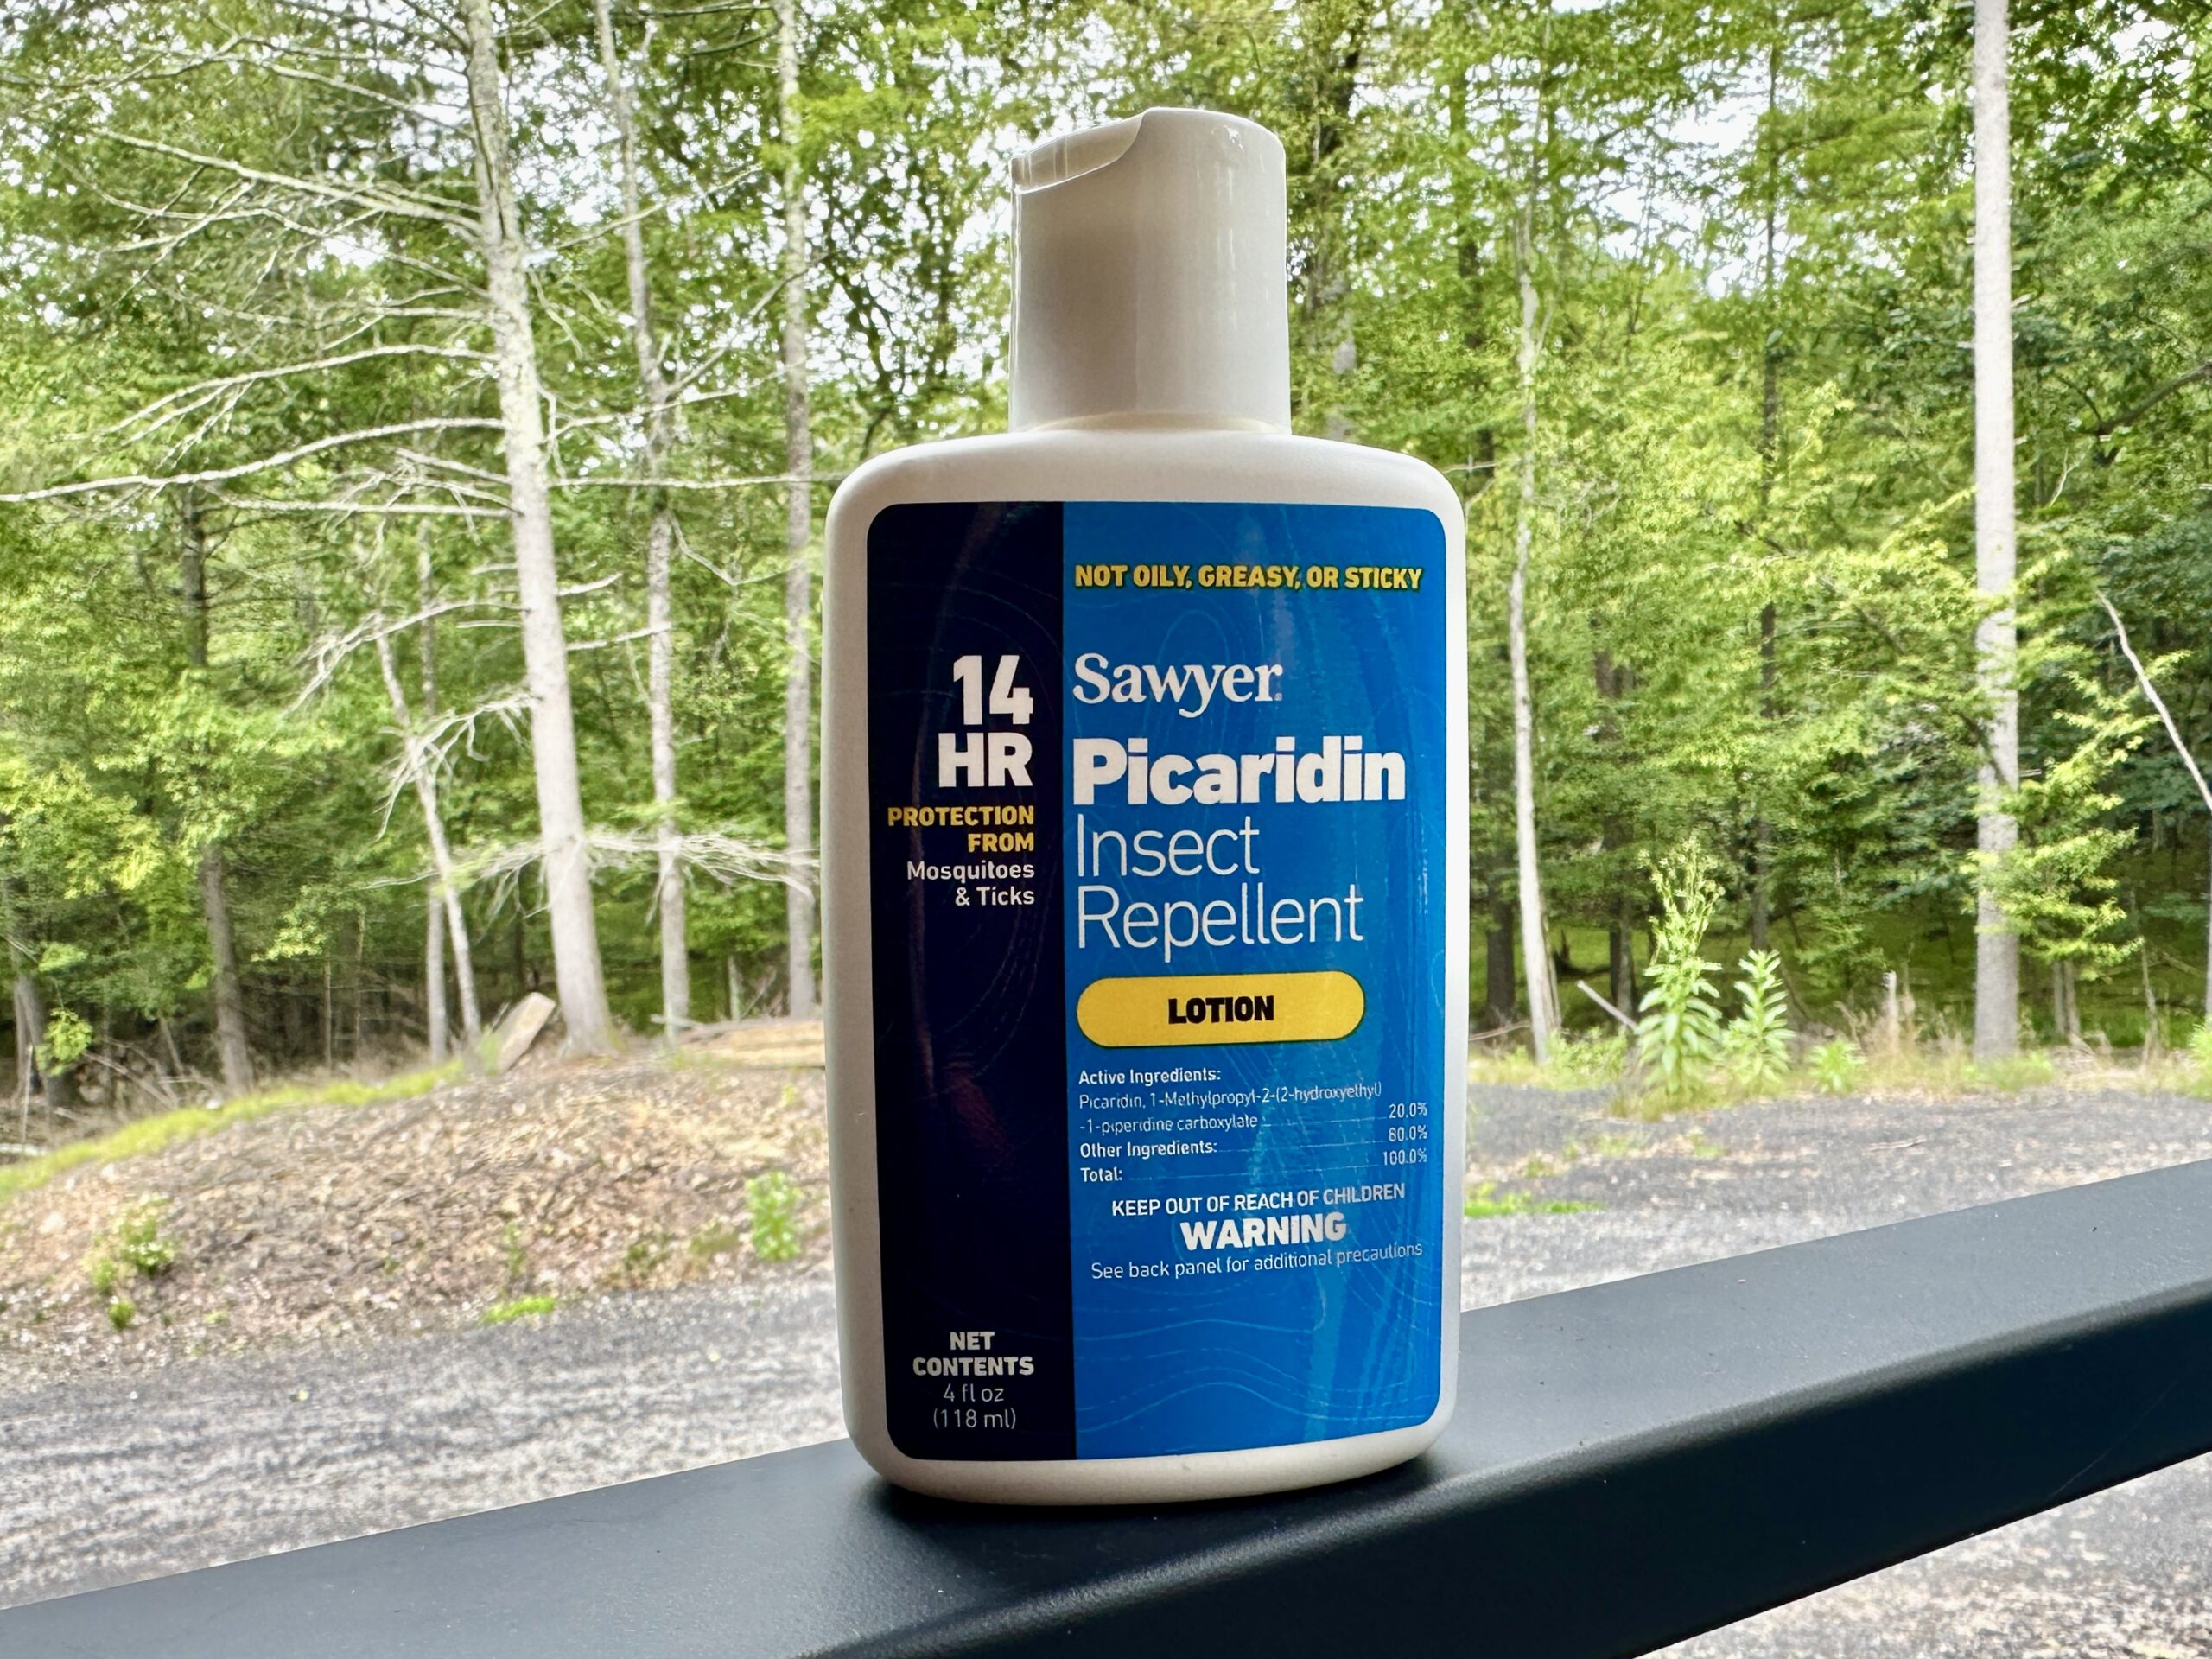 Picardin insect repellent is some of the best bug control